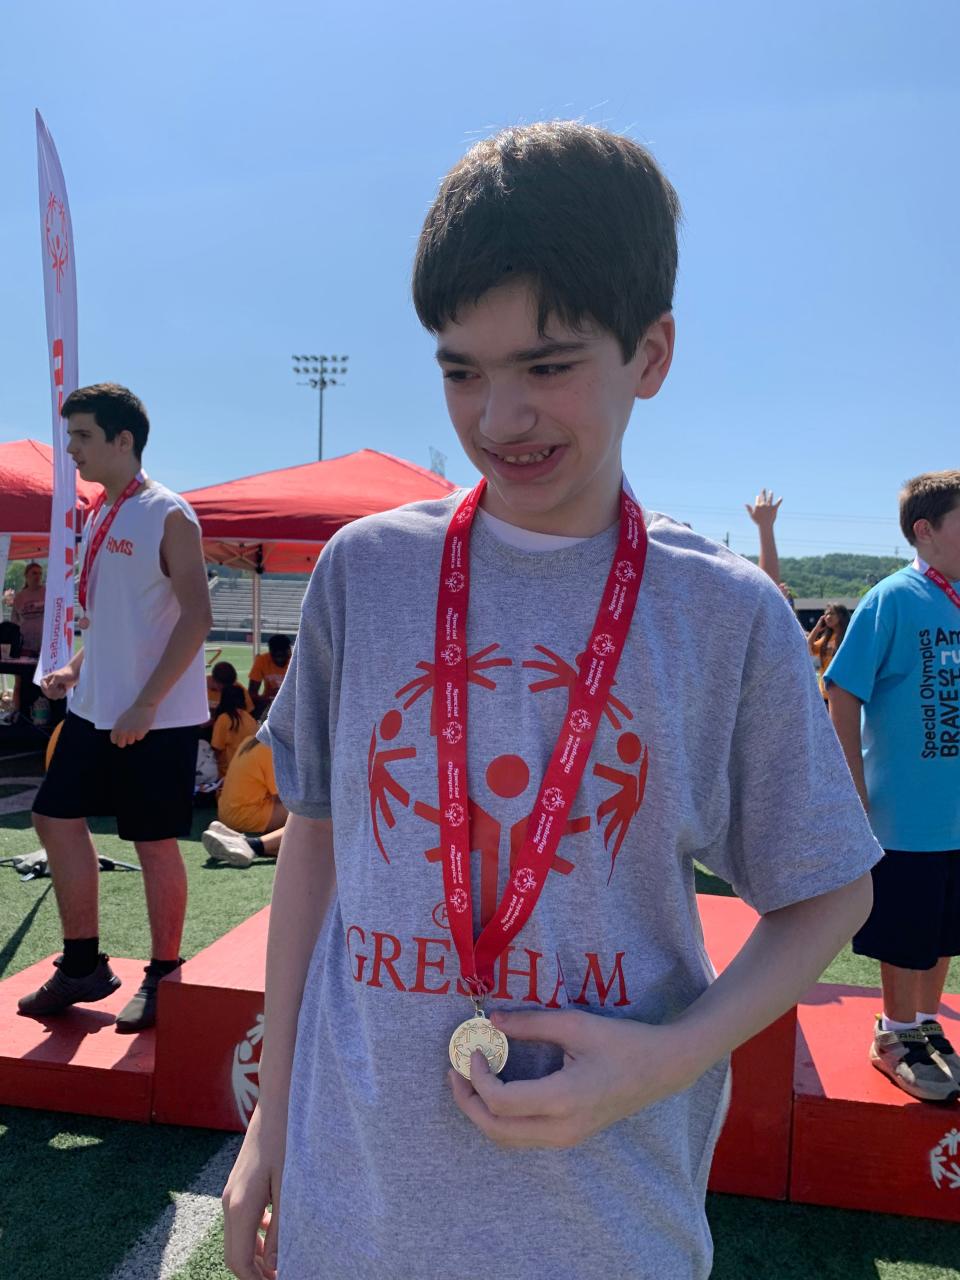 Gresham Middle School Special Olympics athlete Nate Aboumoussa at a track and field event in 2022.